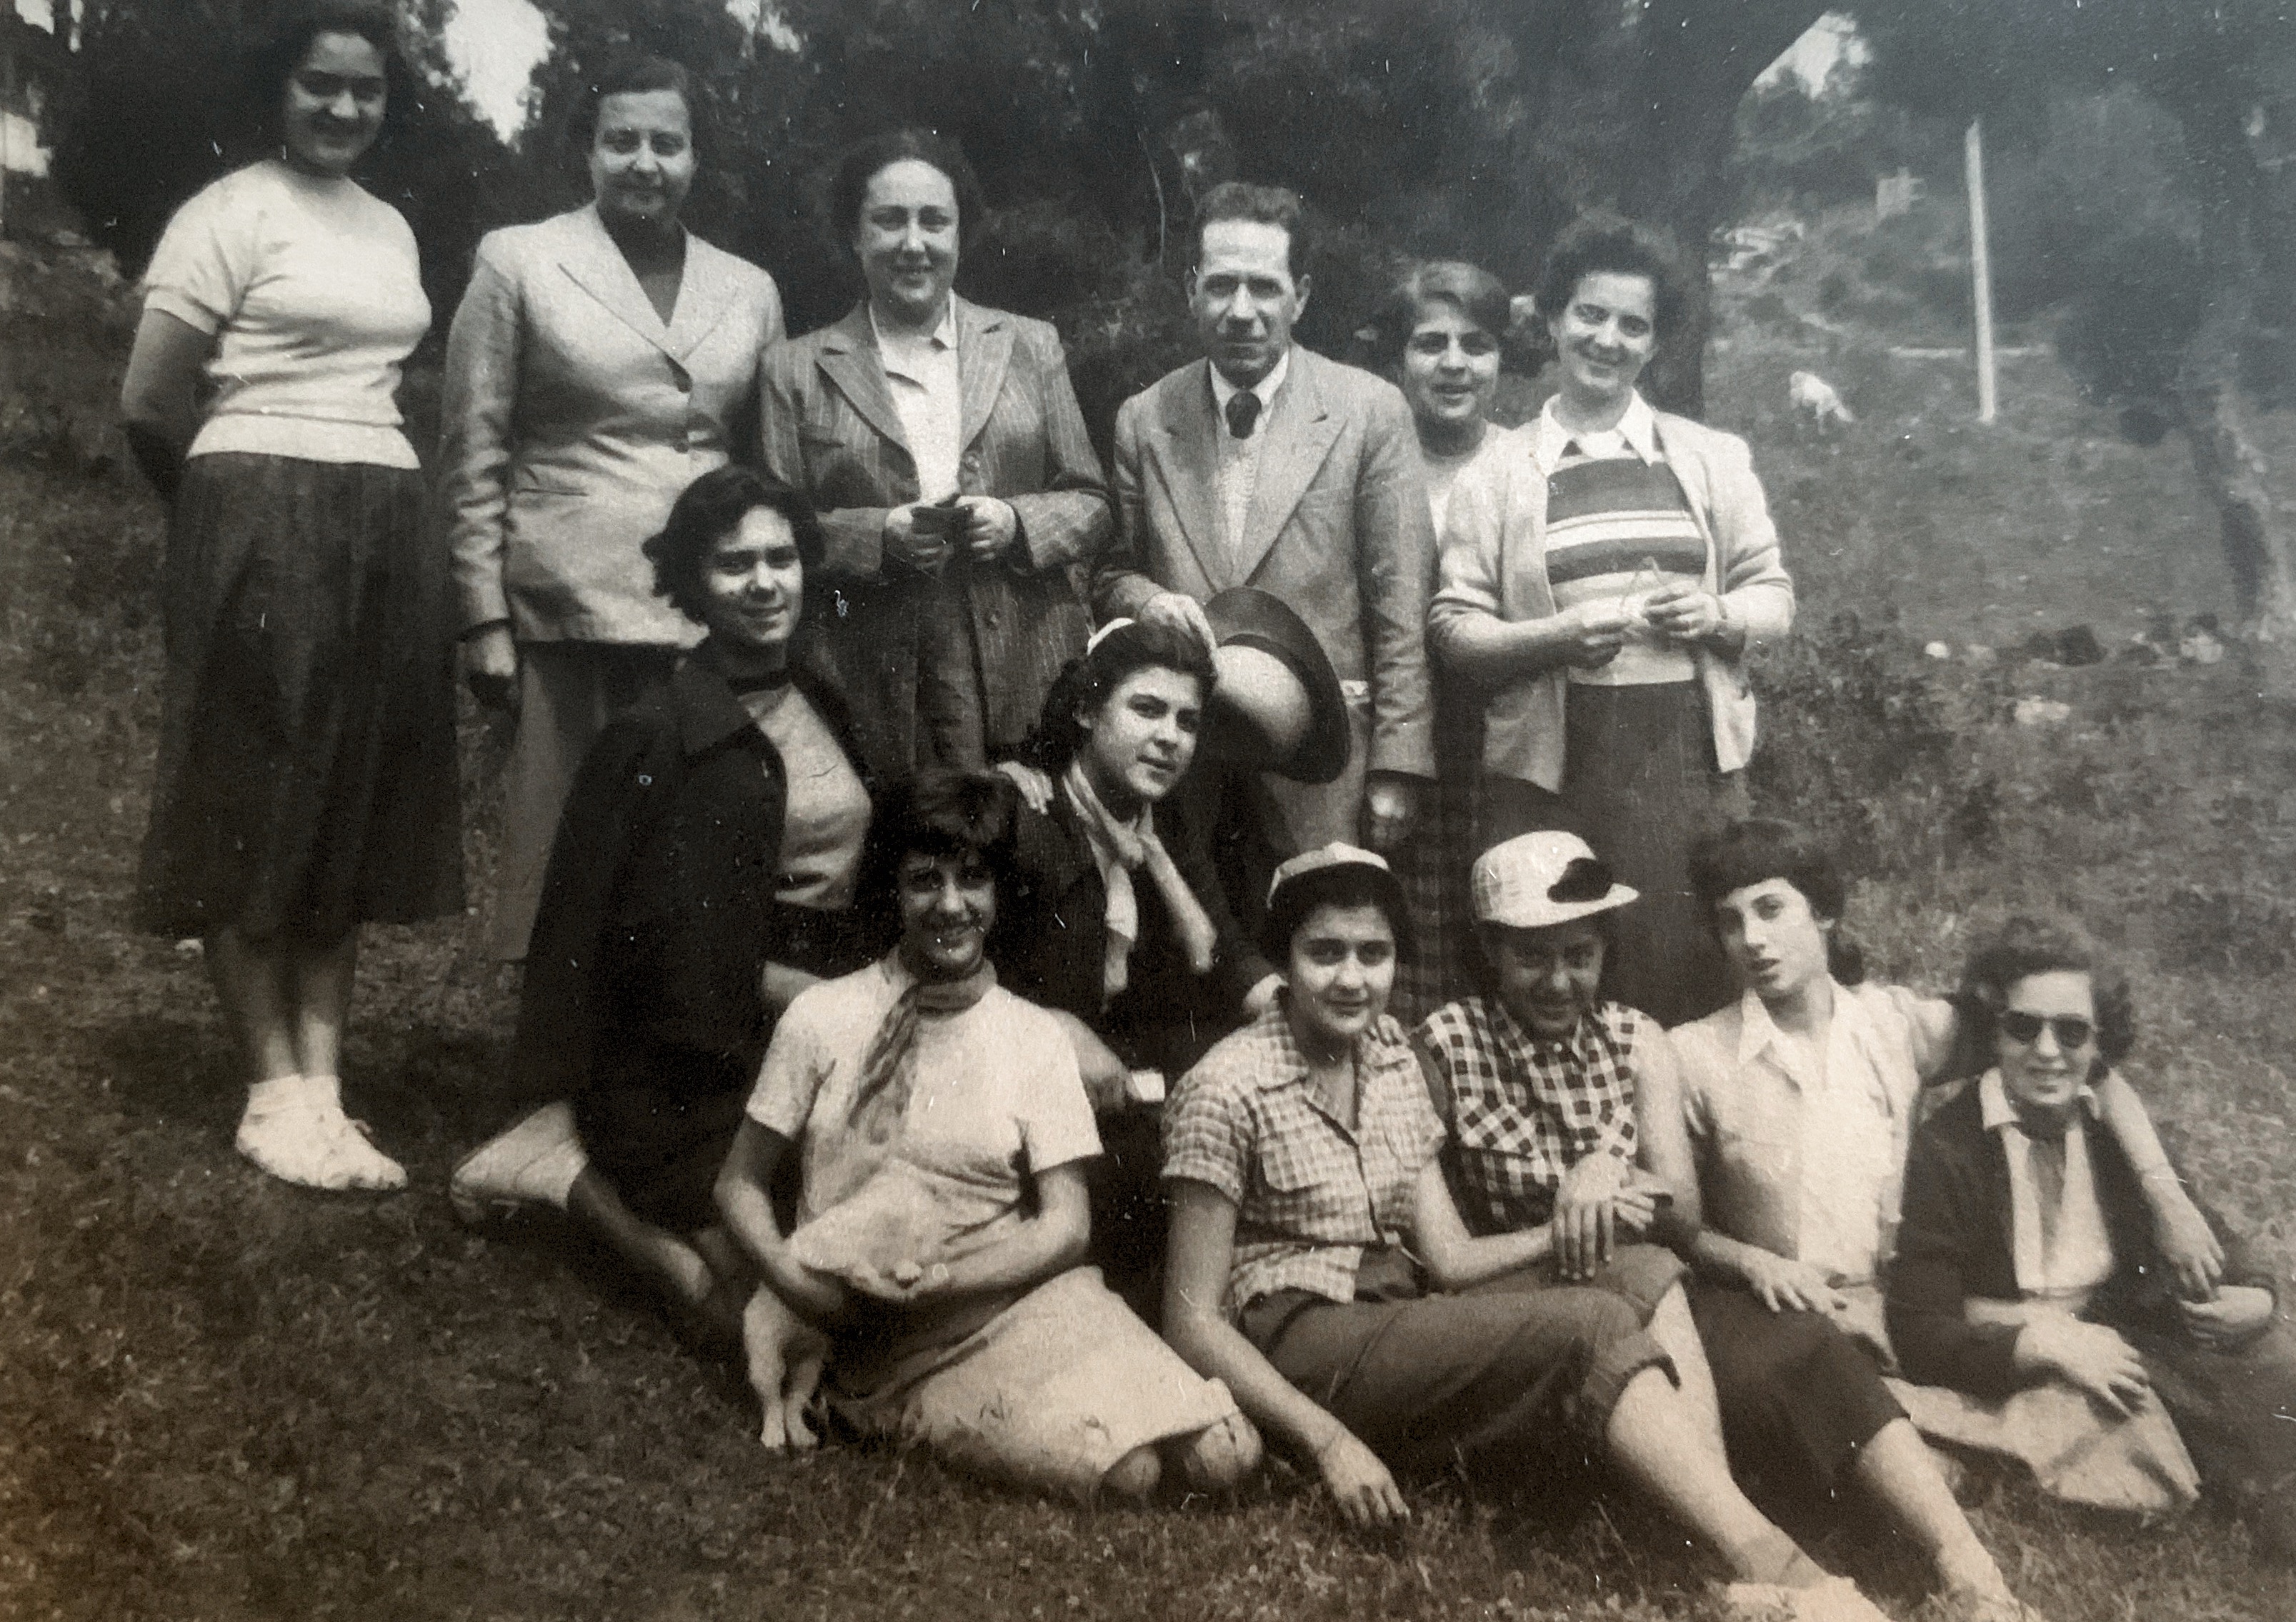 School outing on Penteli 1953 from the Sœurs Joseph school. M sitting in front row one from right. Teachers at the back.